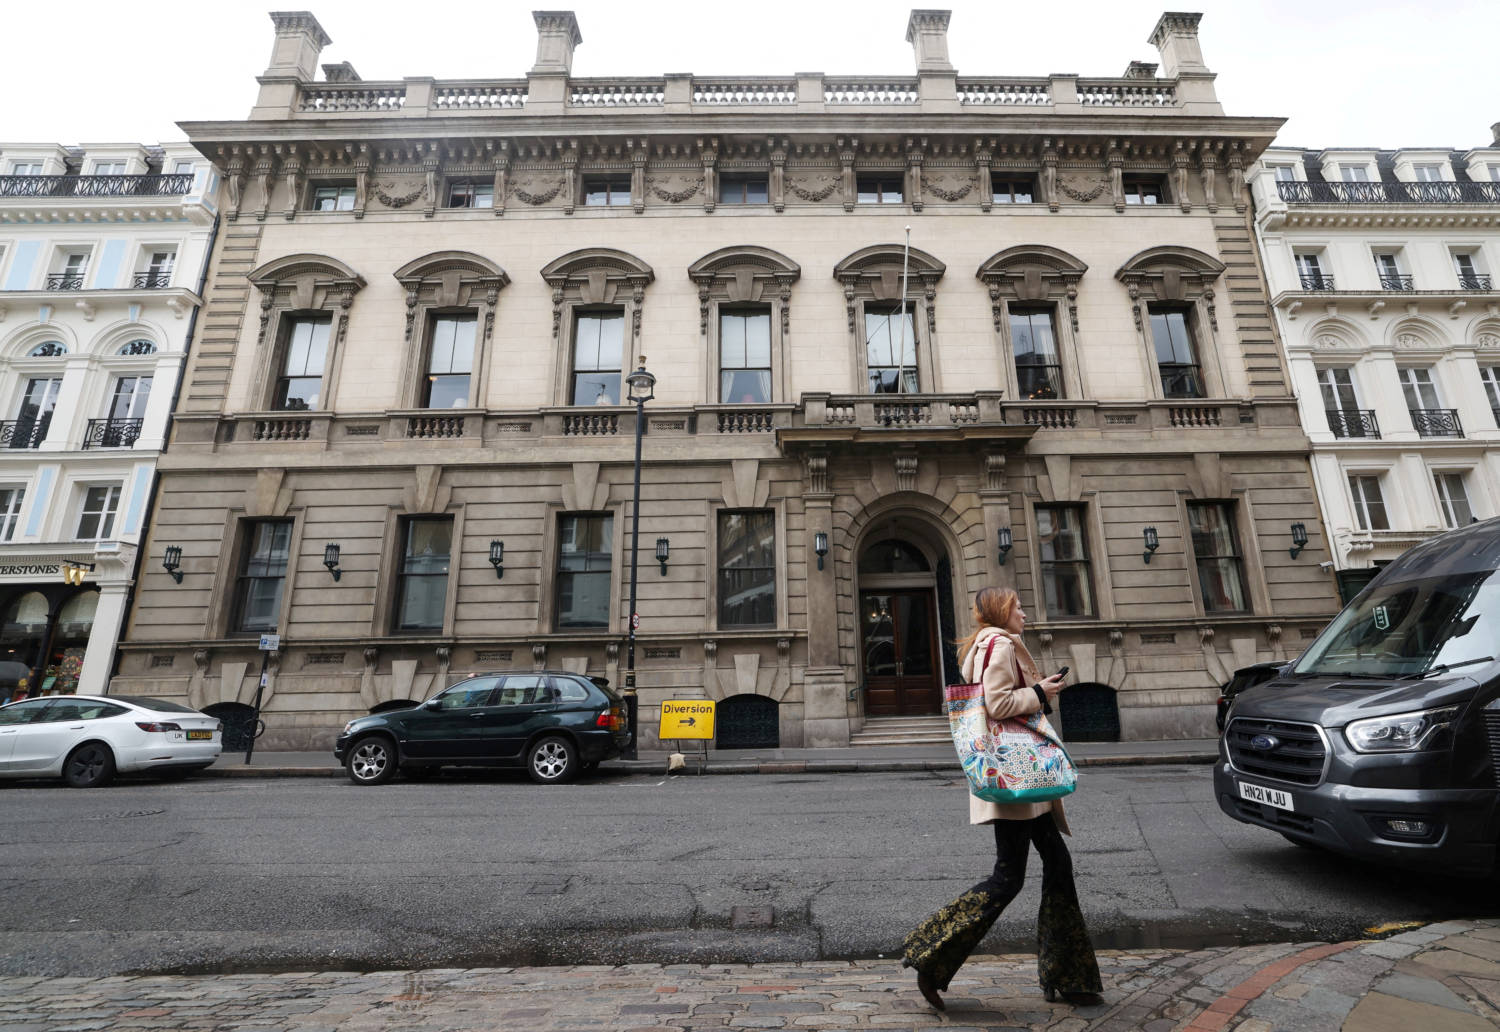 File Photo: A Person Walks Past The Entrance To The Garrick Club In London